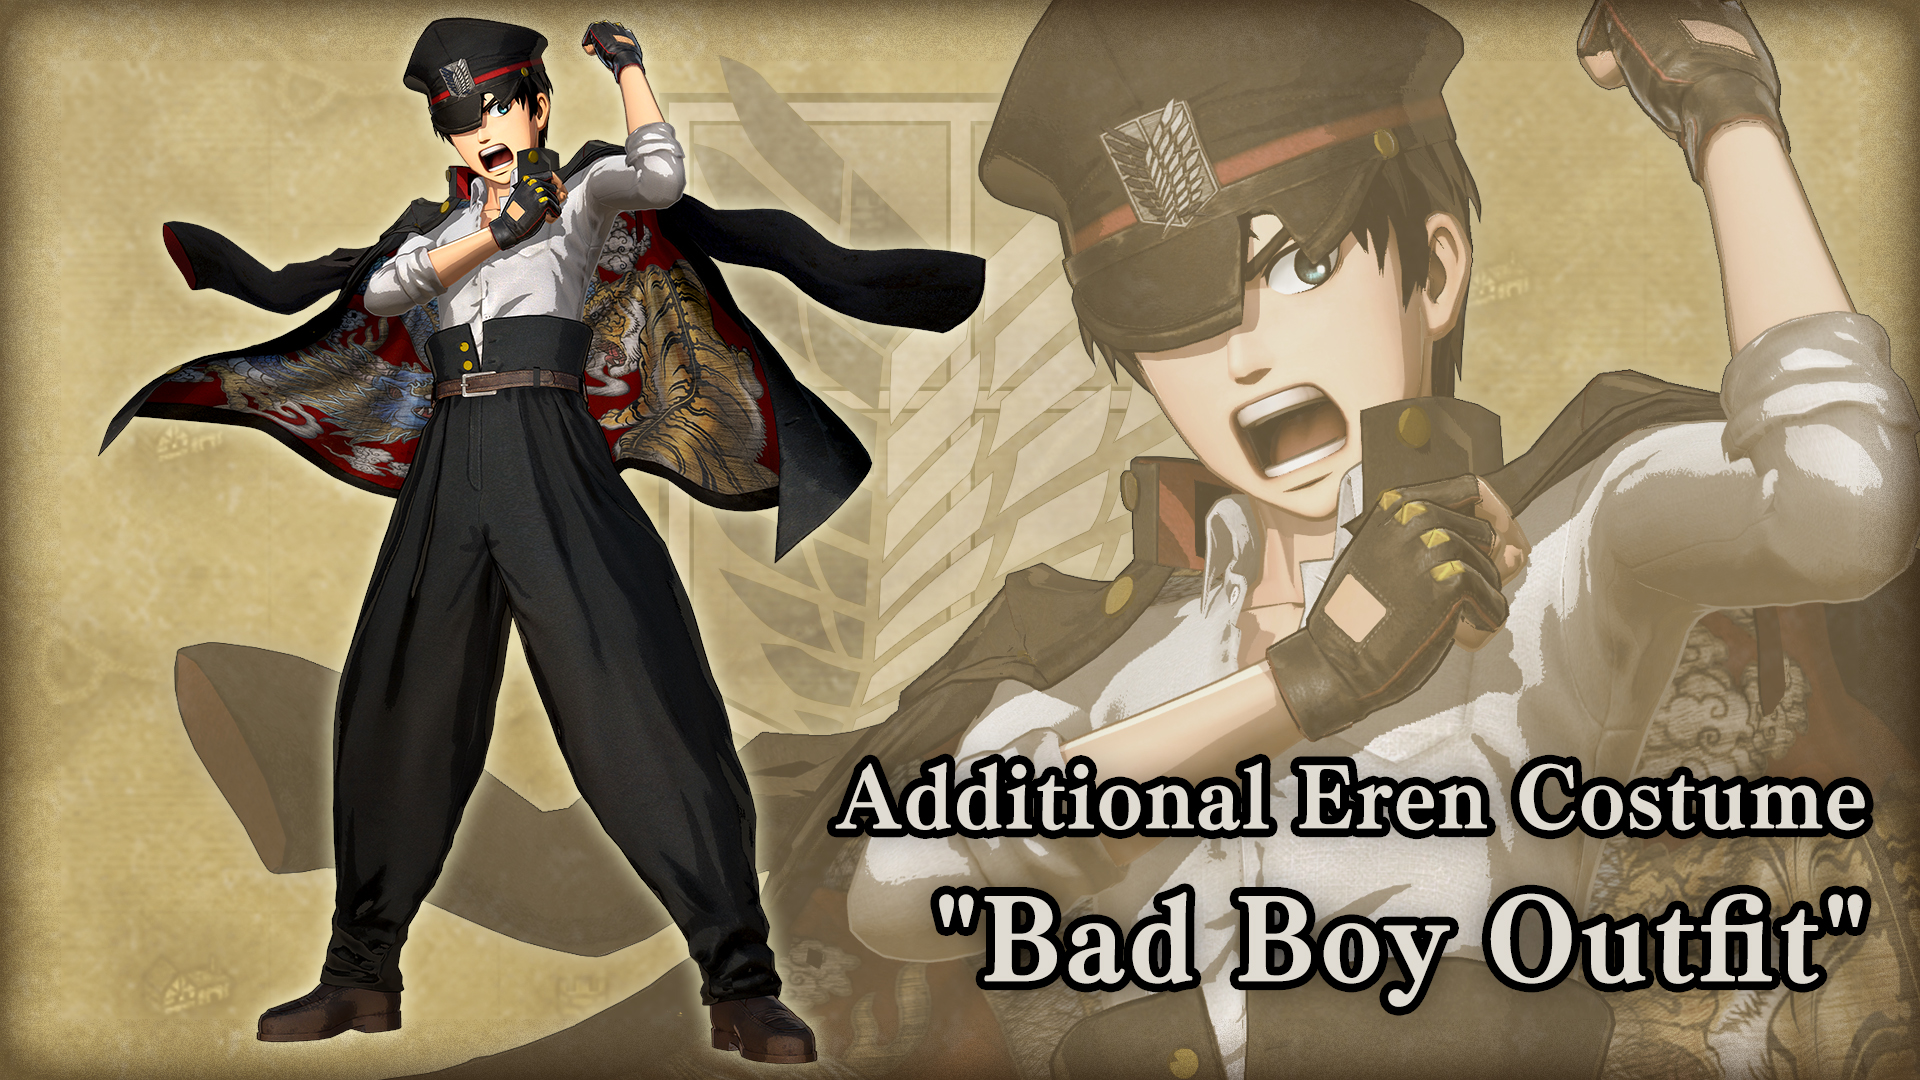 Additional Eren Costume: "Bad Boy Outfit"